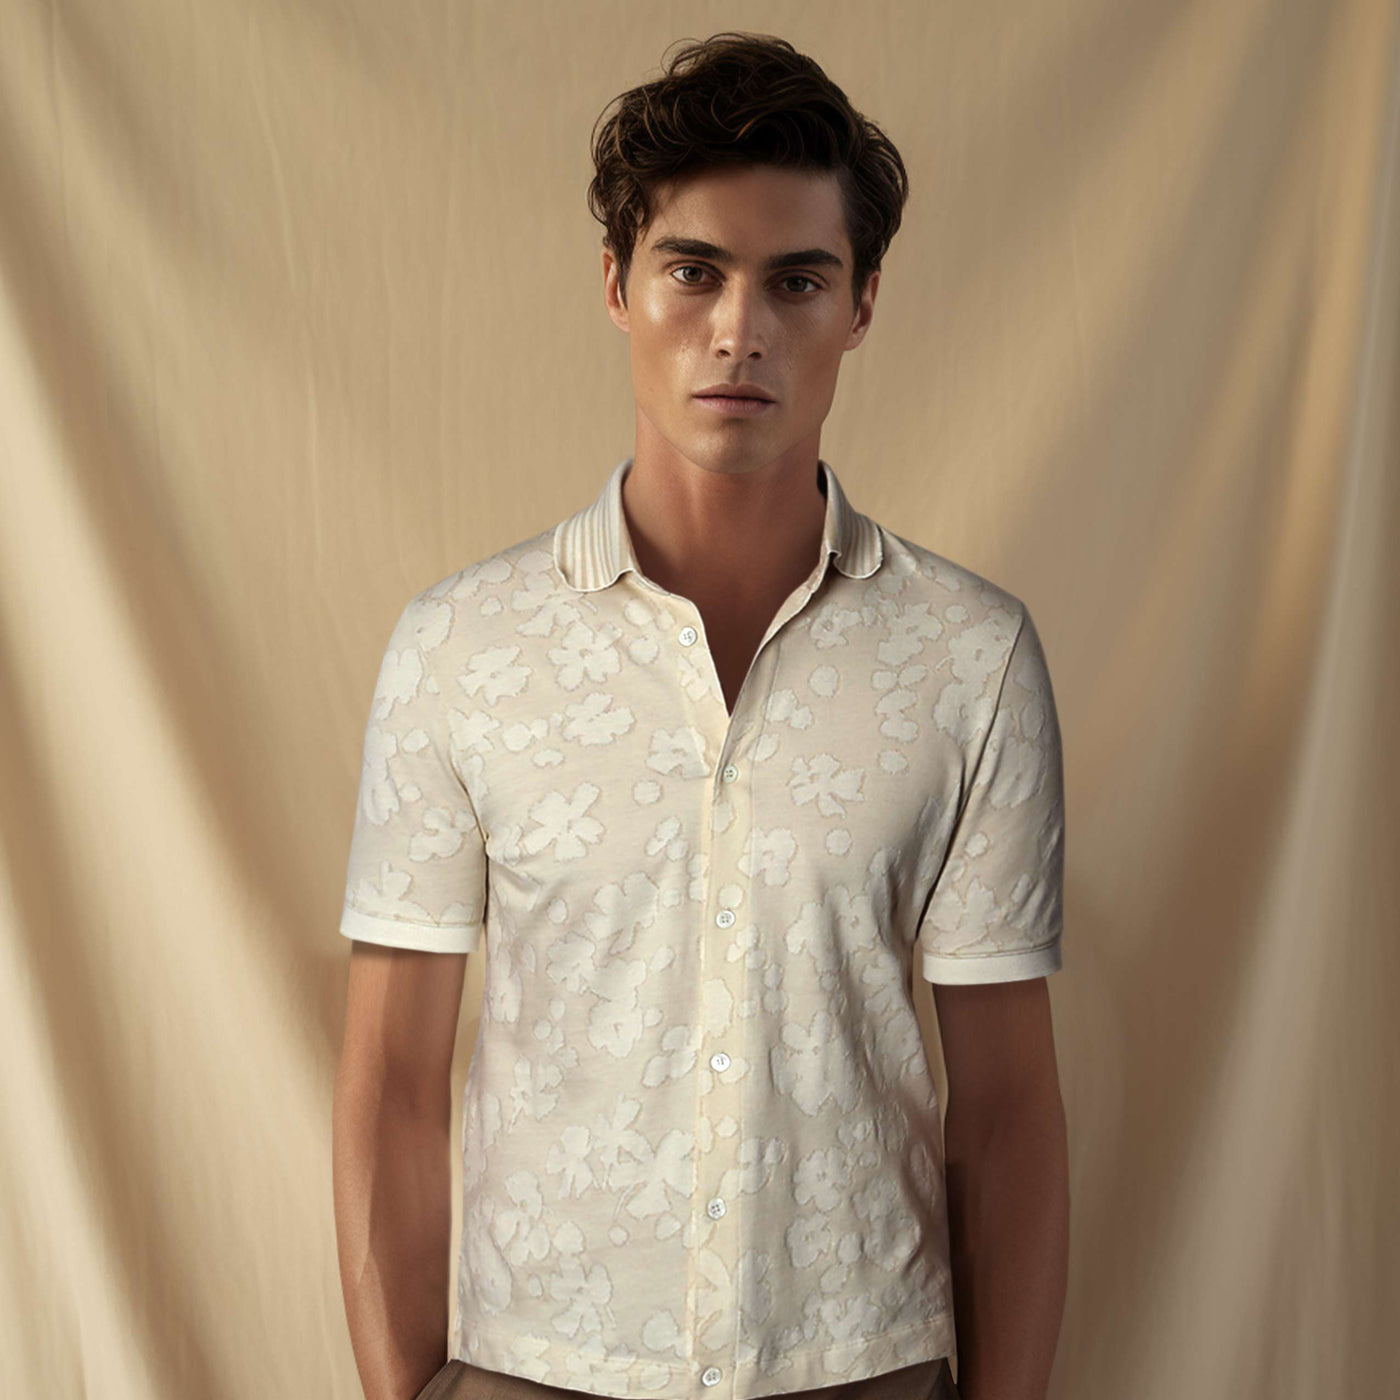 Paul Smith Floral Jacquard Polo Shirt in Cream Model